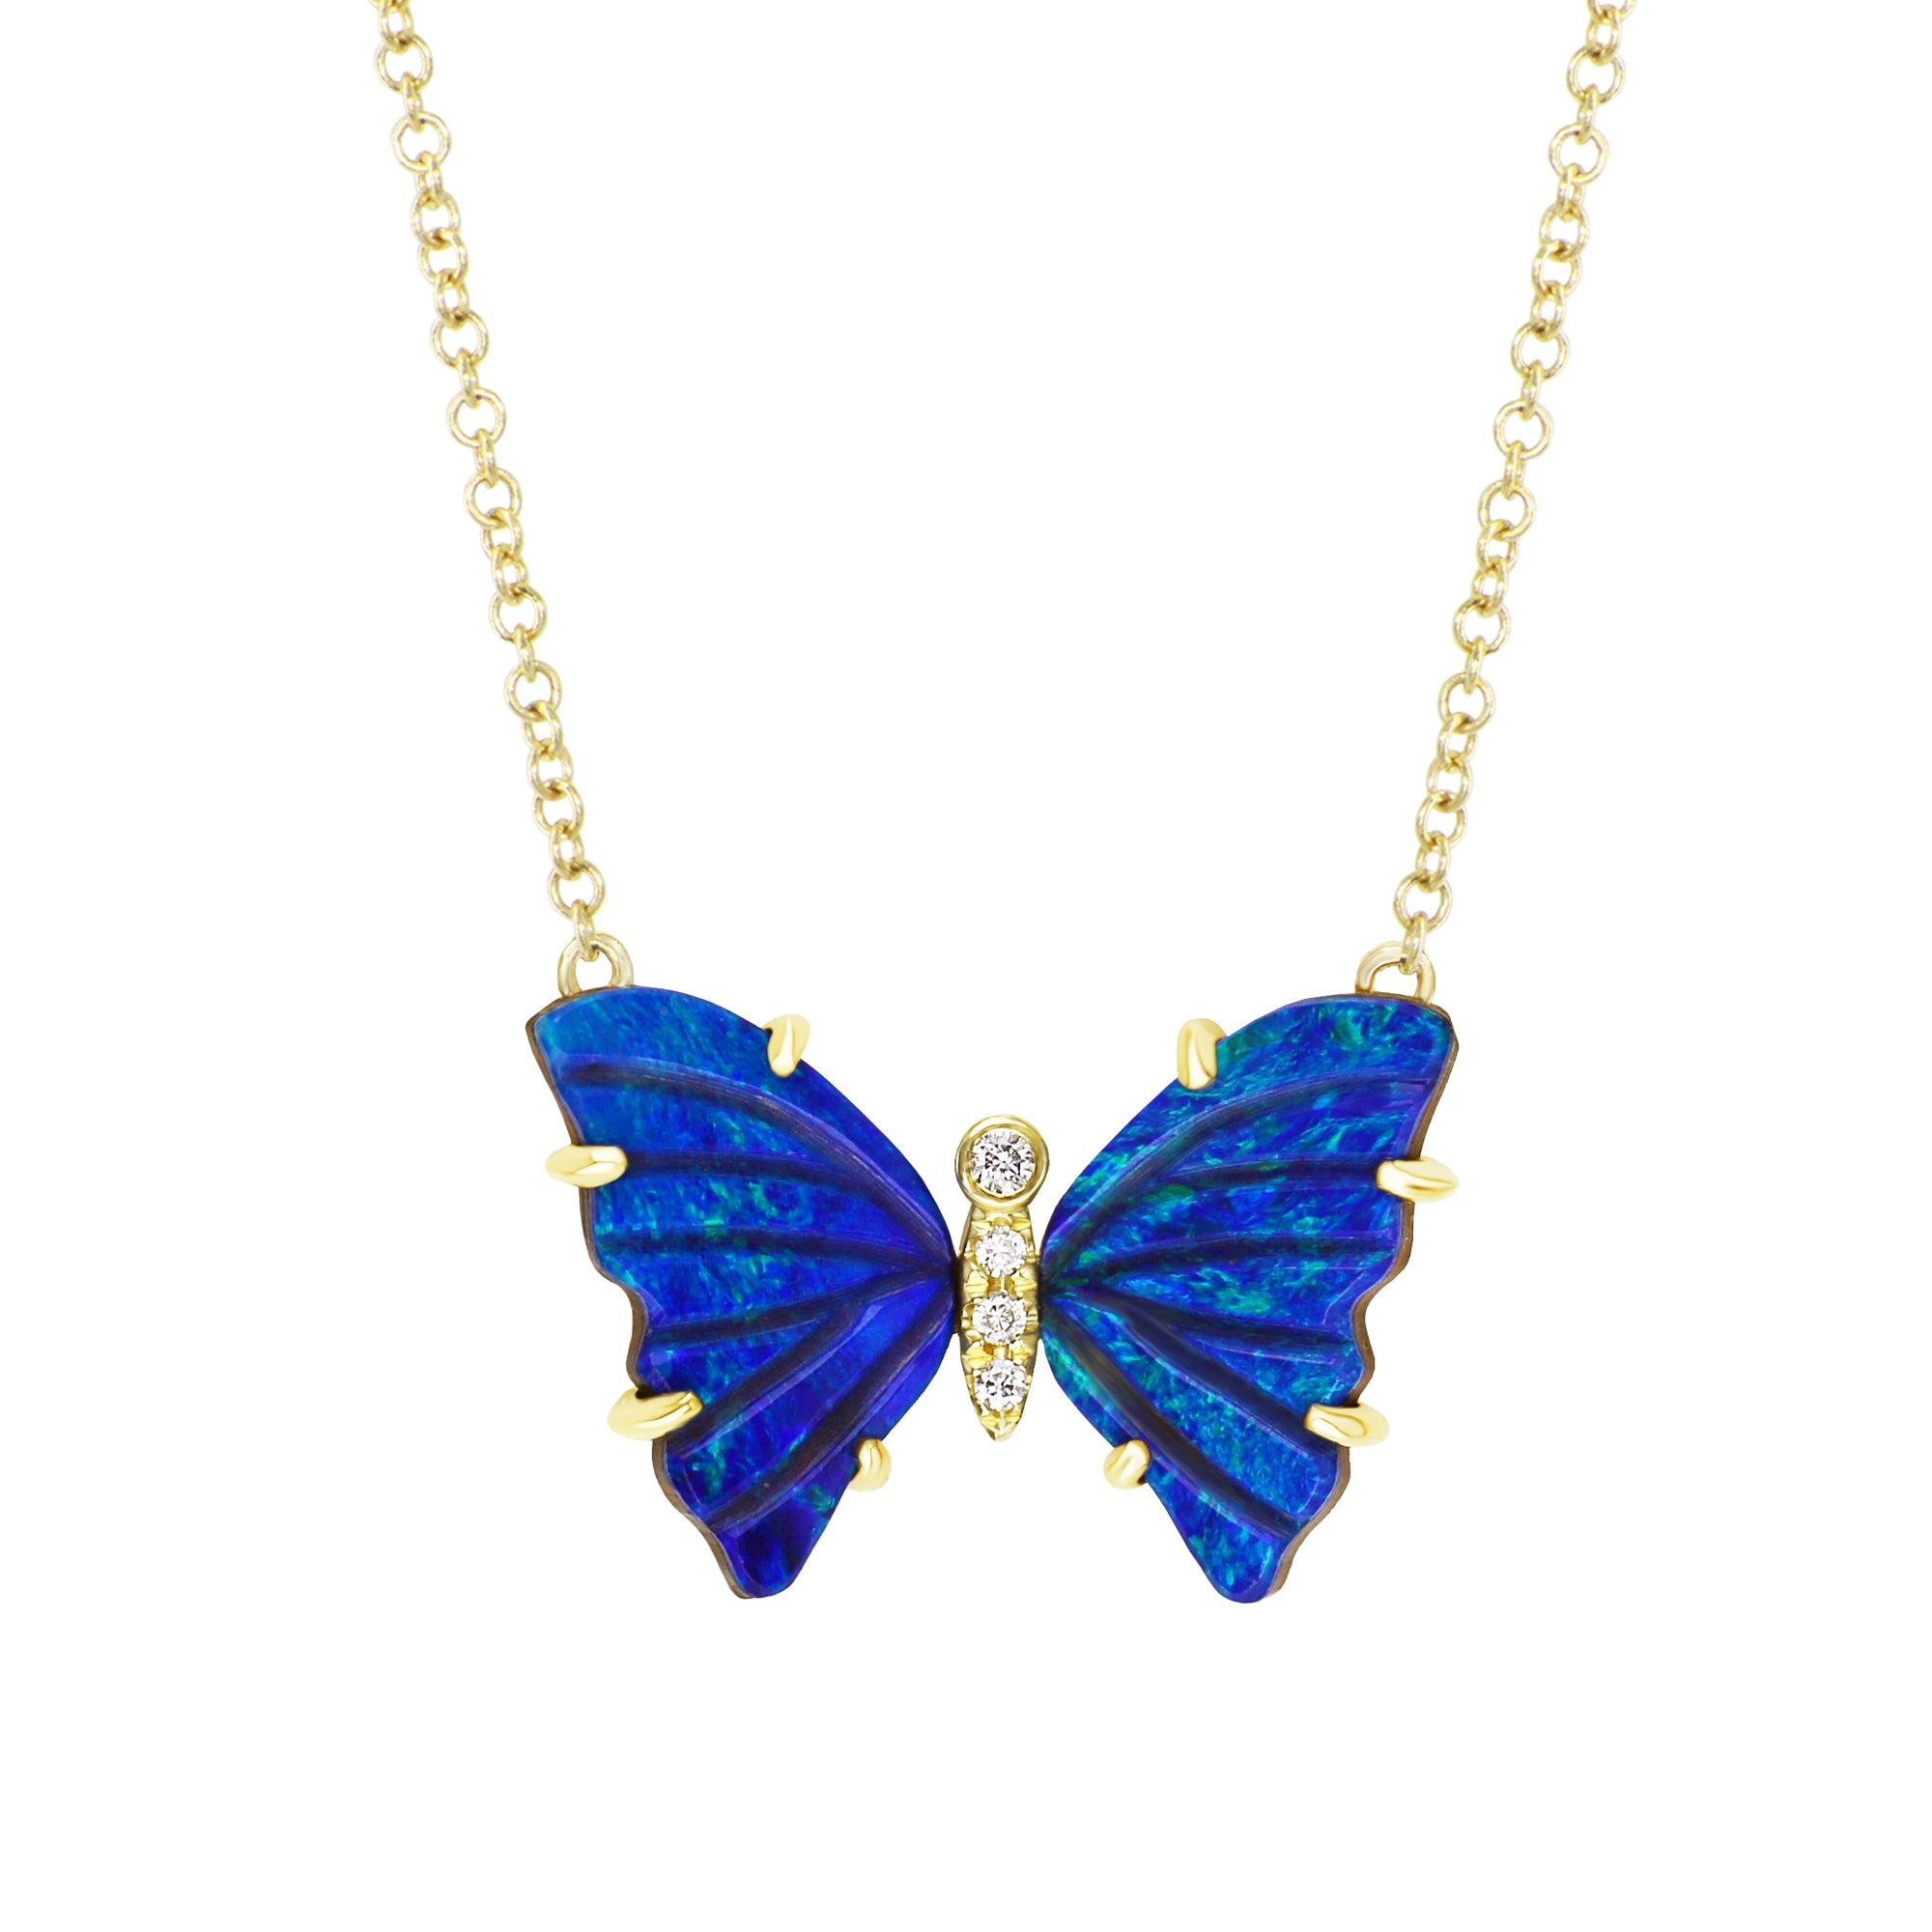 mini pronged butterfly necklace with carved boulder opal